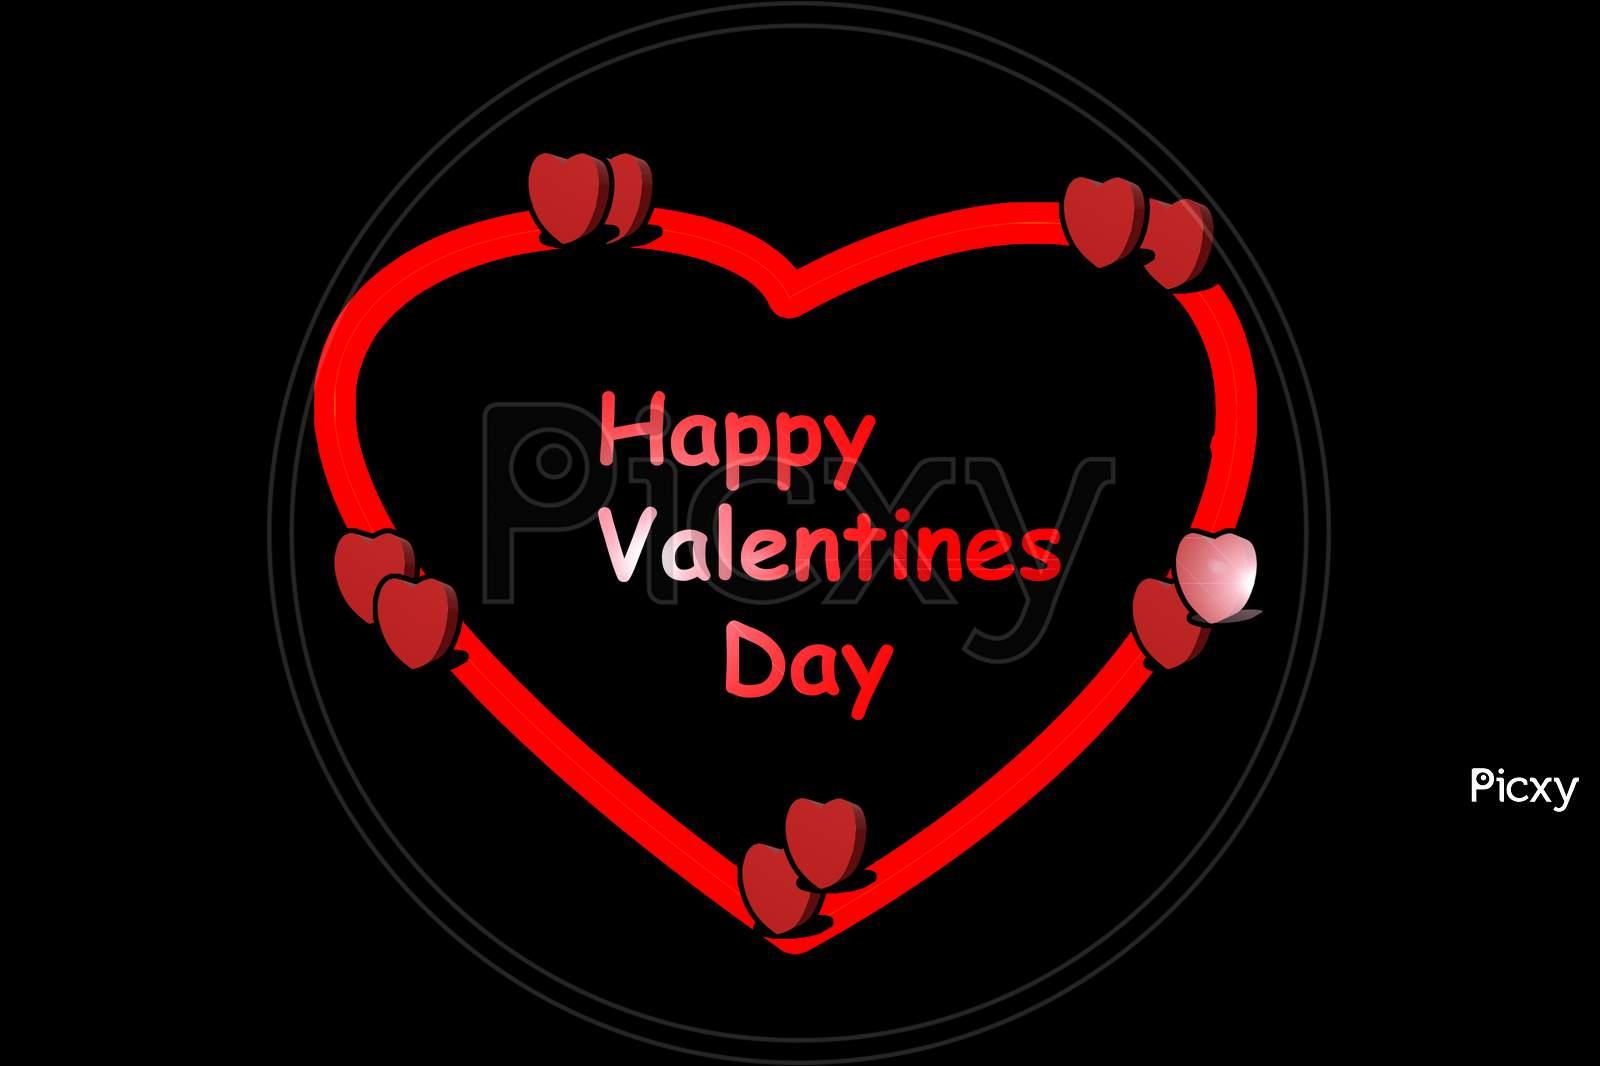 Image Of Happy Valentines Day Red Heart Shape On Black Background